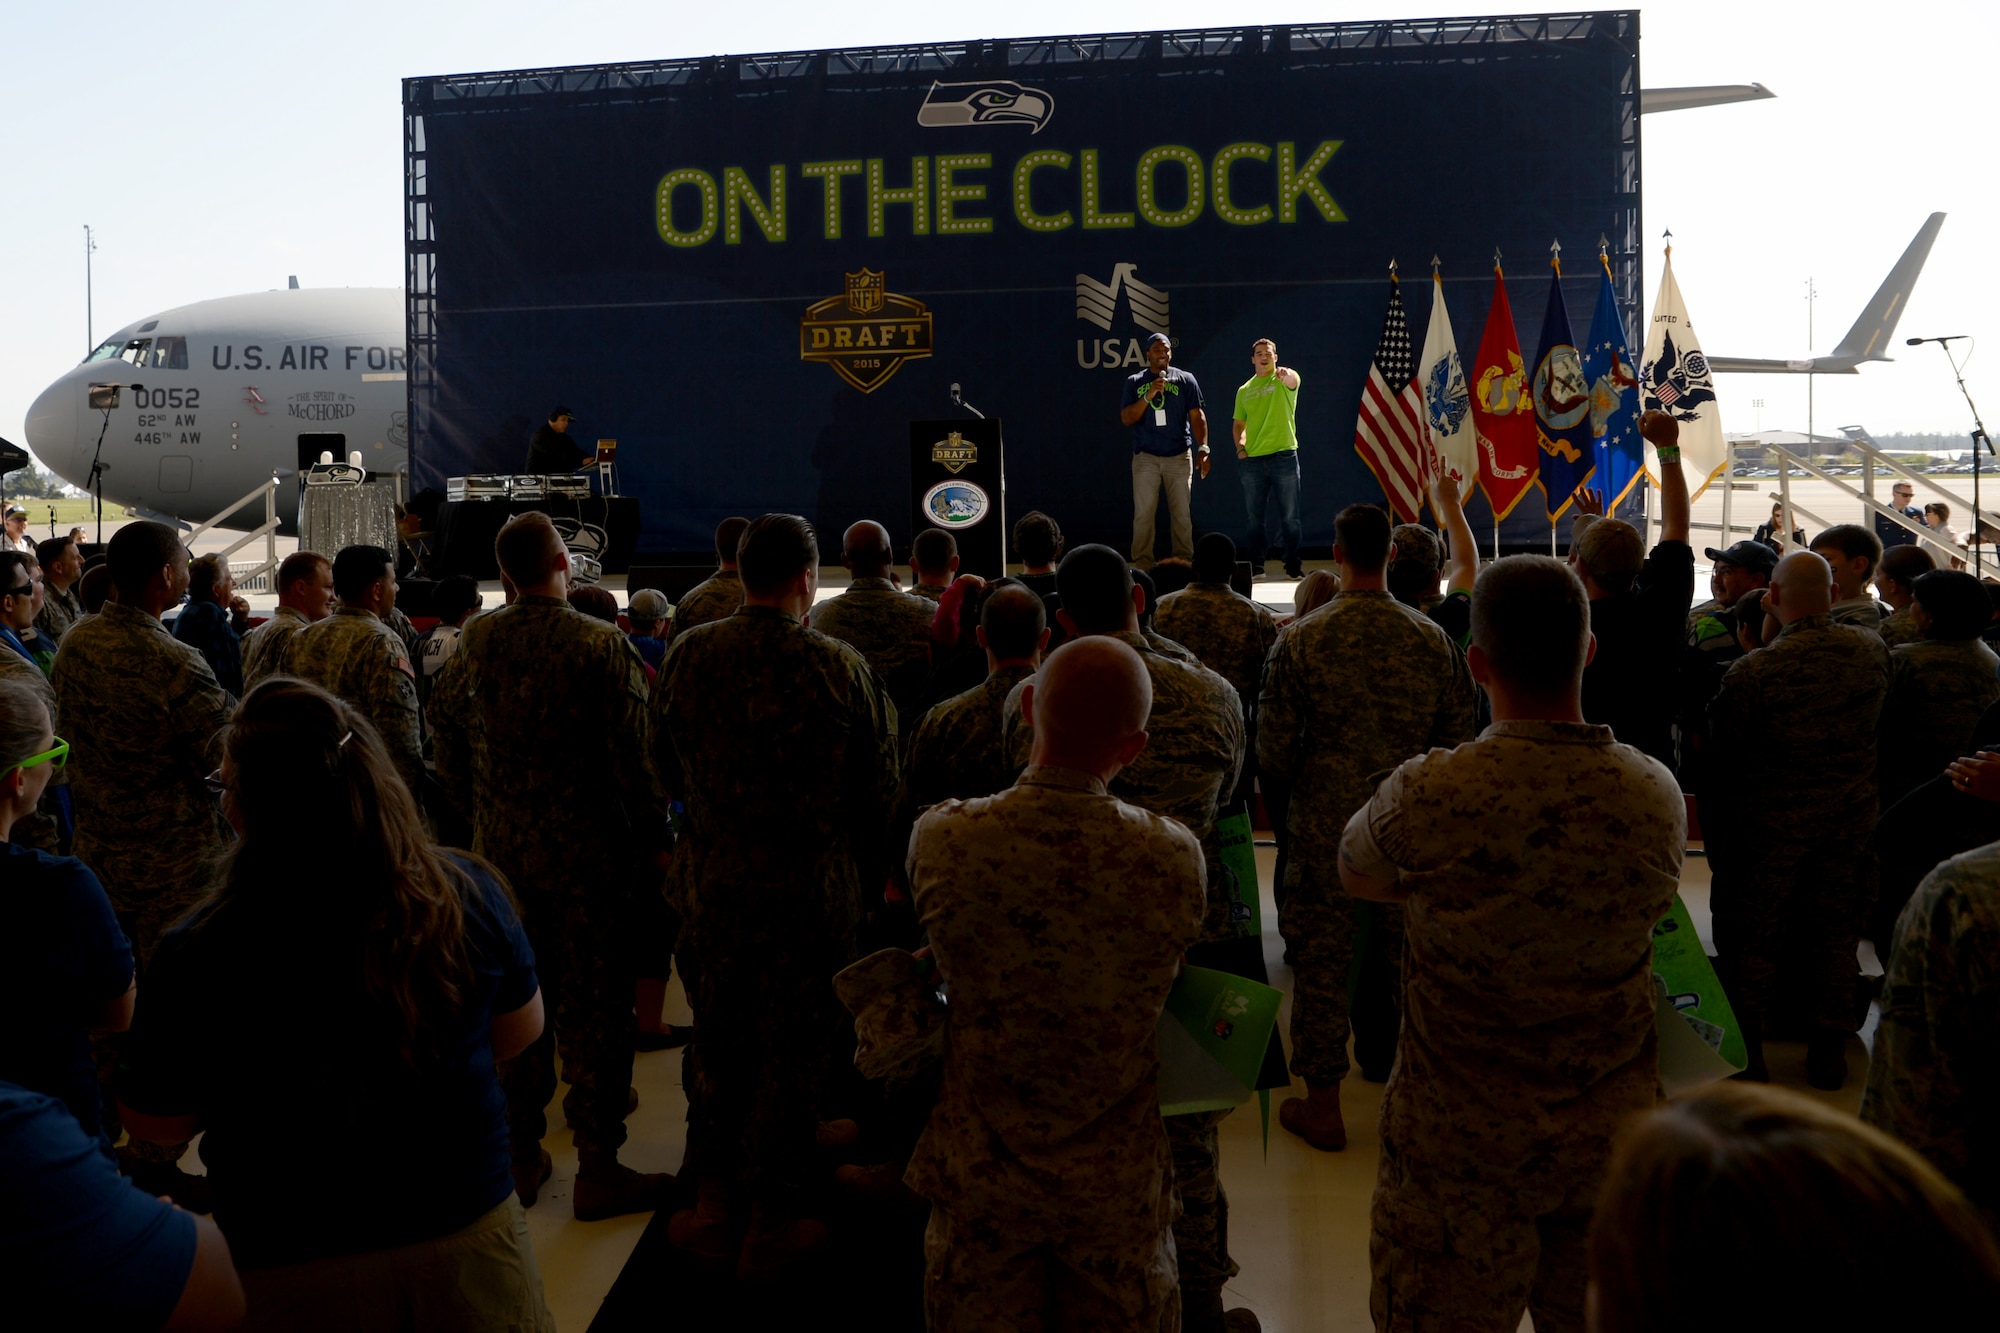 Greg Suggs, Seattle Seahawks defensive end (left), and Brock Coyle, Seahawks linebacker, talk to the crowd during the Seahawks draft day event on Joint Base Lewi-McChord, Wash., May 2, 2015. The event took place on the third day of the 2015 NFL draft and featured several service members from the Air Force, Army, Marines, Navy, and Coast Guard announcing the Seahawks draft picks. (U.S. Air Force photo\ Staff Sgt. Tim Chacon) 